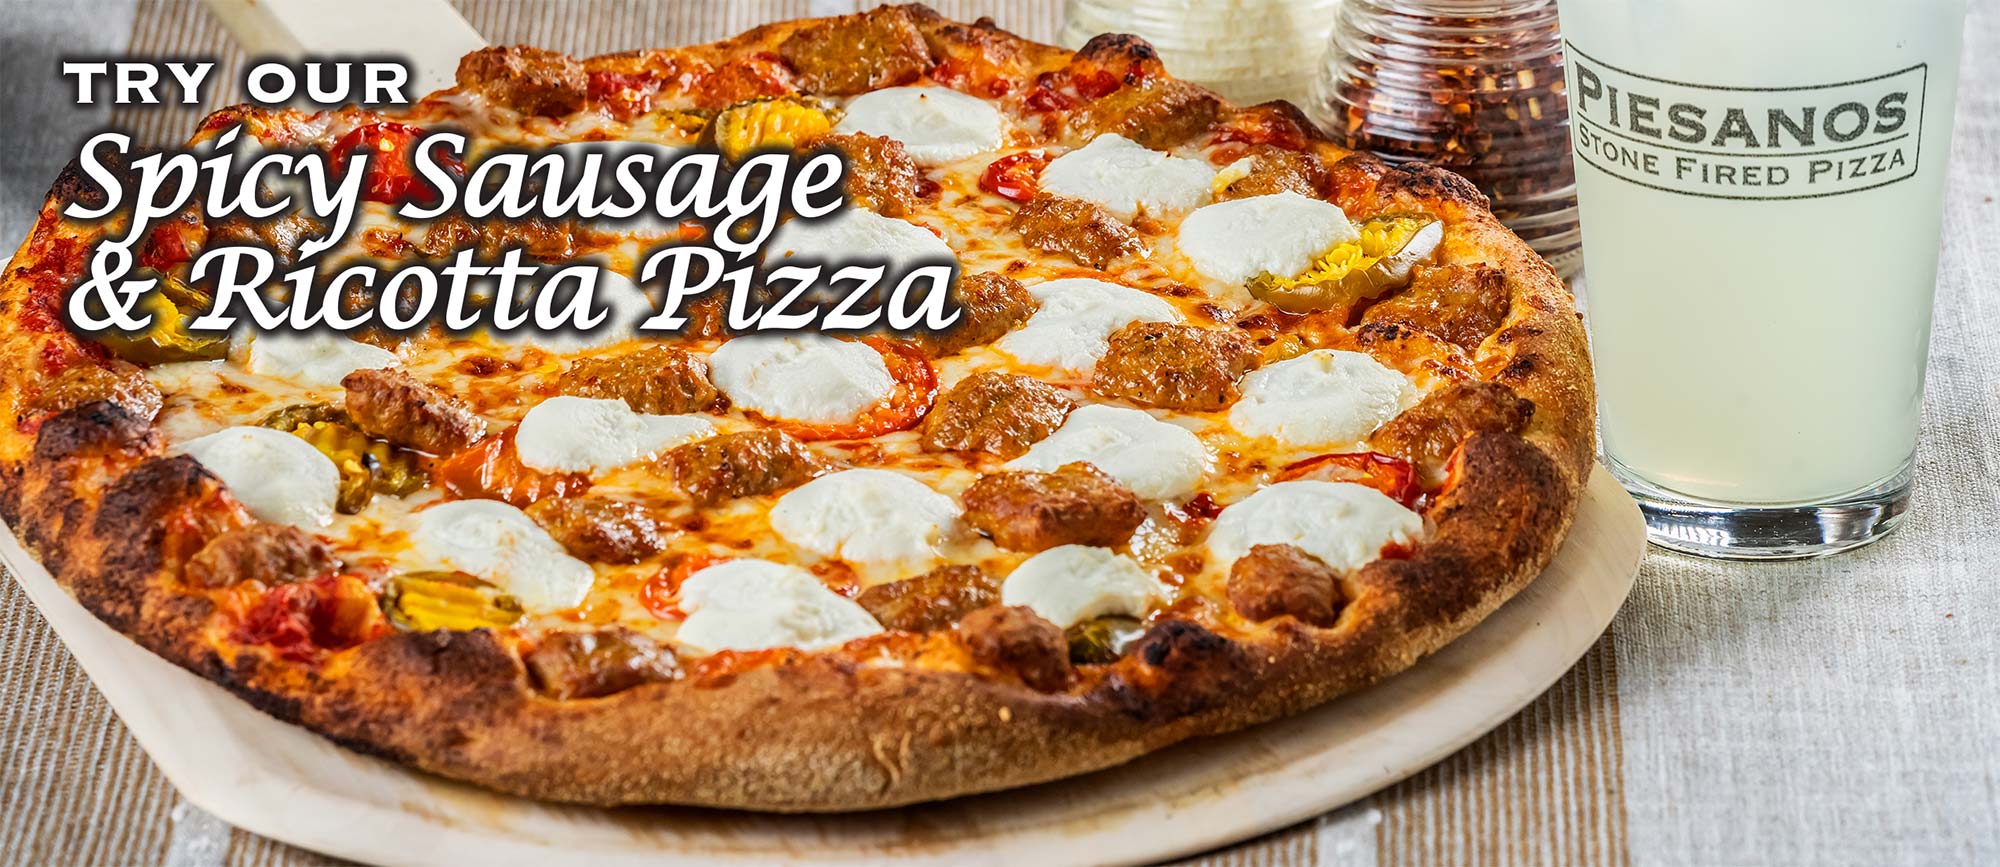 Try our new spicy sausage and ricotta pizza and discover a new favorite.